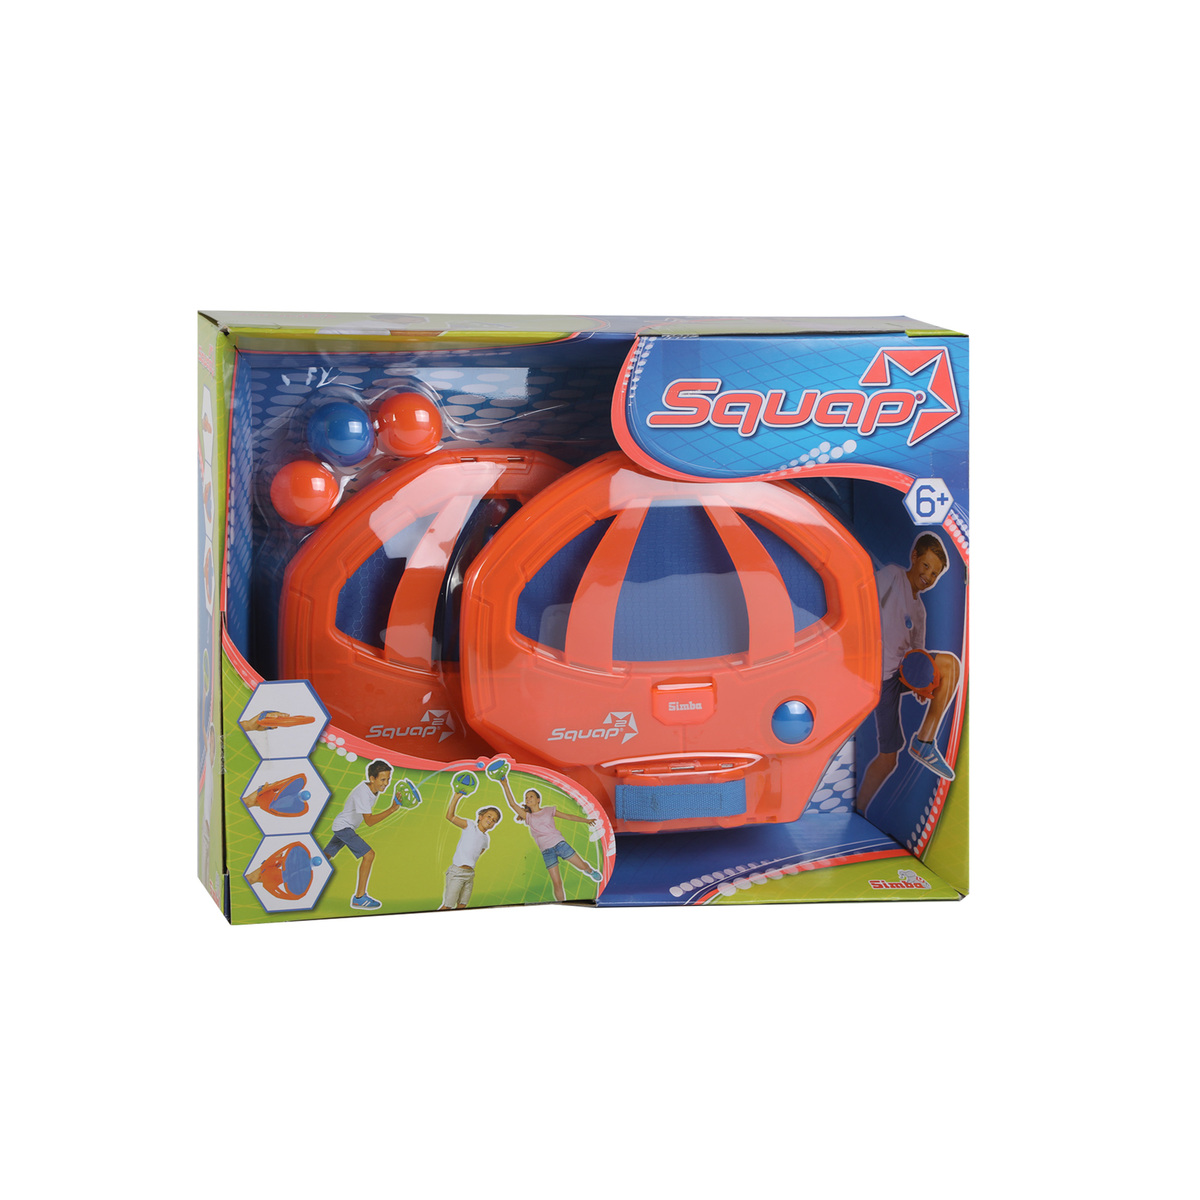 Simba Squap Catch Ball Game 7203950 Assorted Color